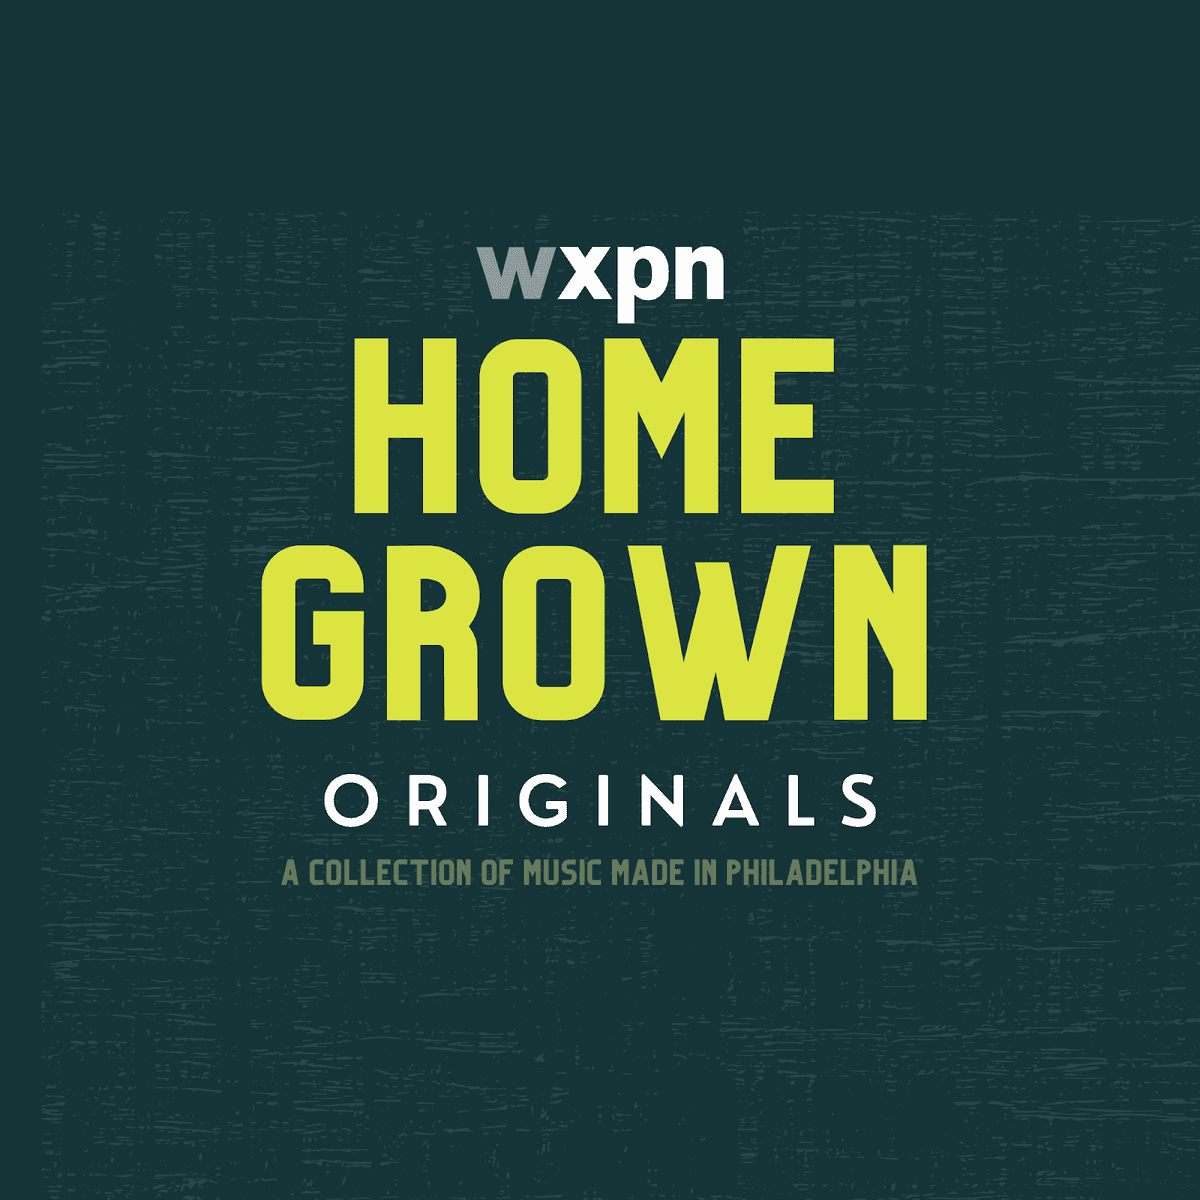 WXPN creates local LP for Record Store Day